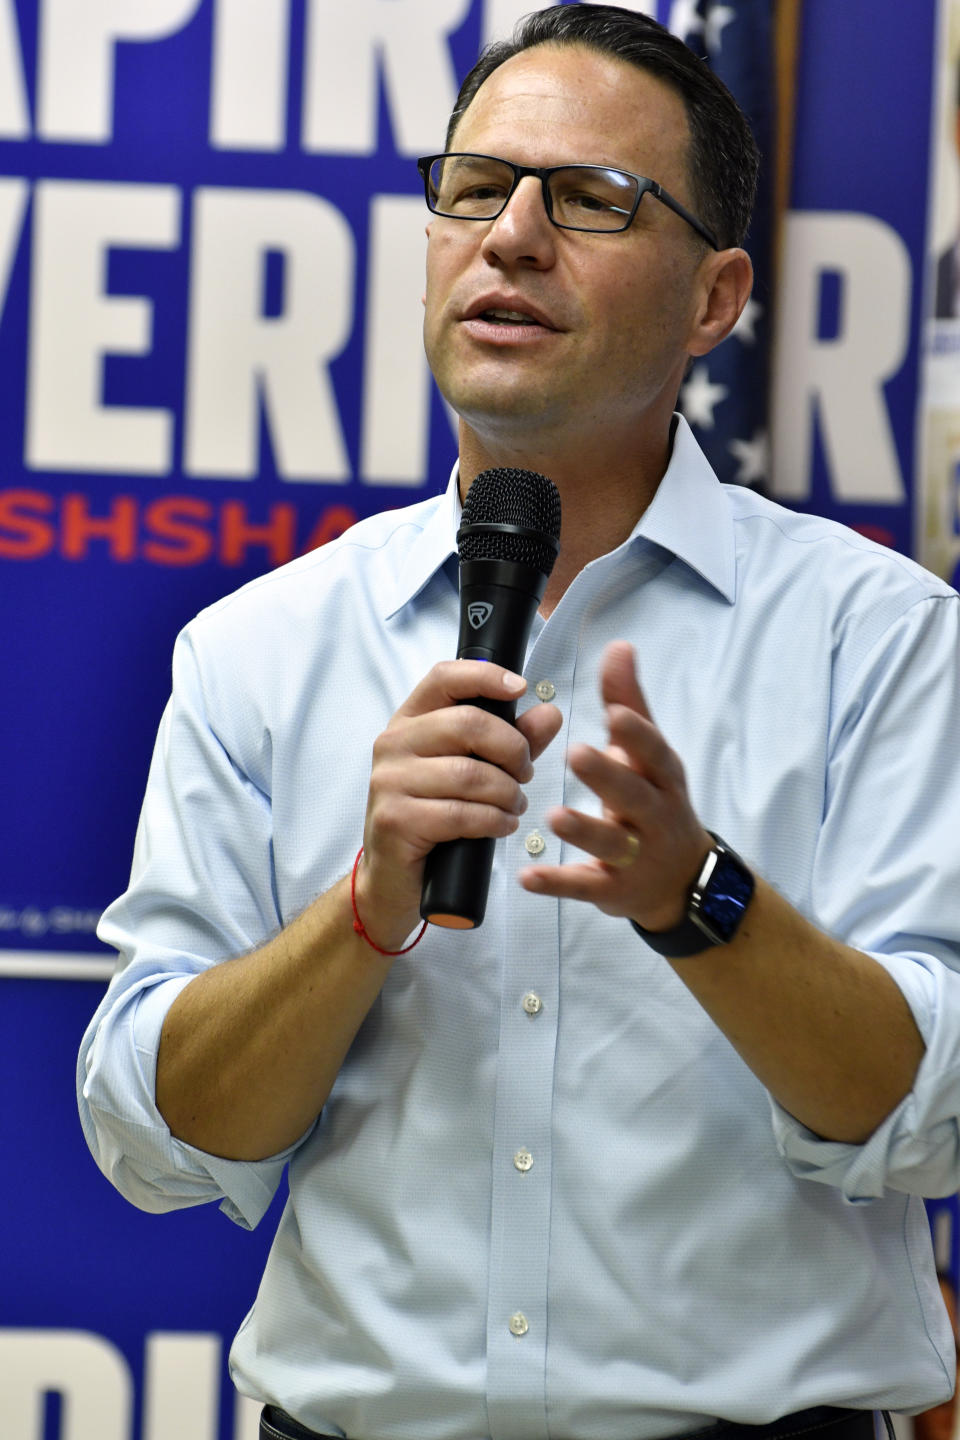 Josh Shapiro, Pennsylvania's Democratic nominee for governor, speaks to the crowd during a campaign event at Adams County Democratic Party headquarters, Sept. 17, 2022, in Gettysburg, Pa. (AP Photo/Marc Levy)